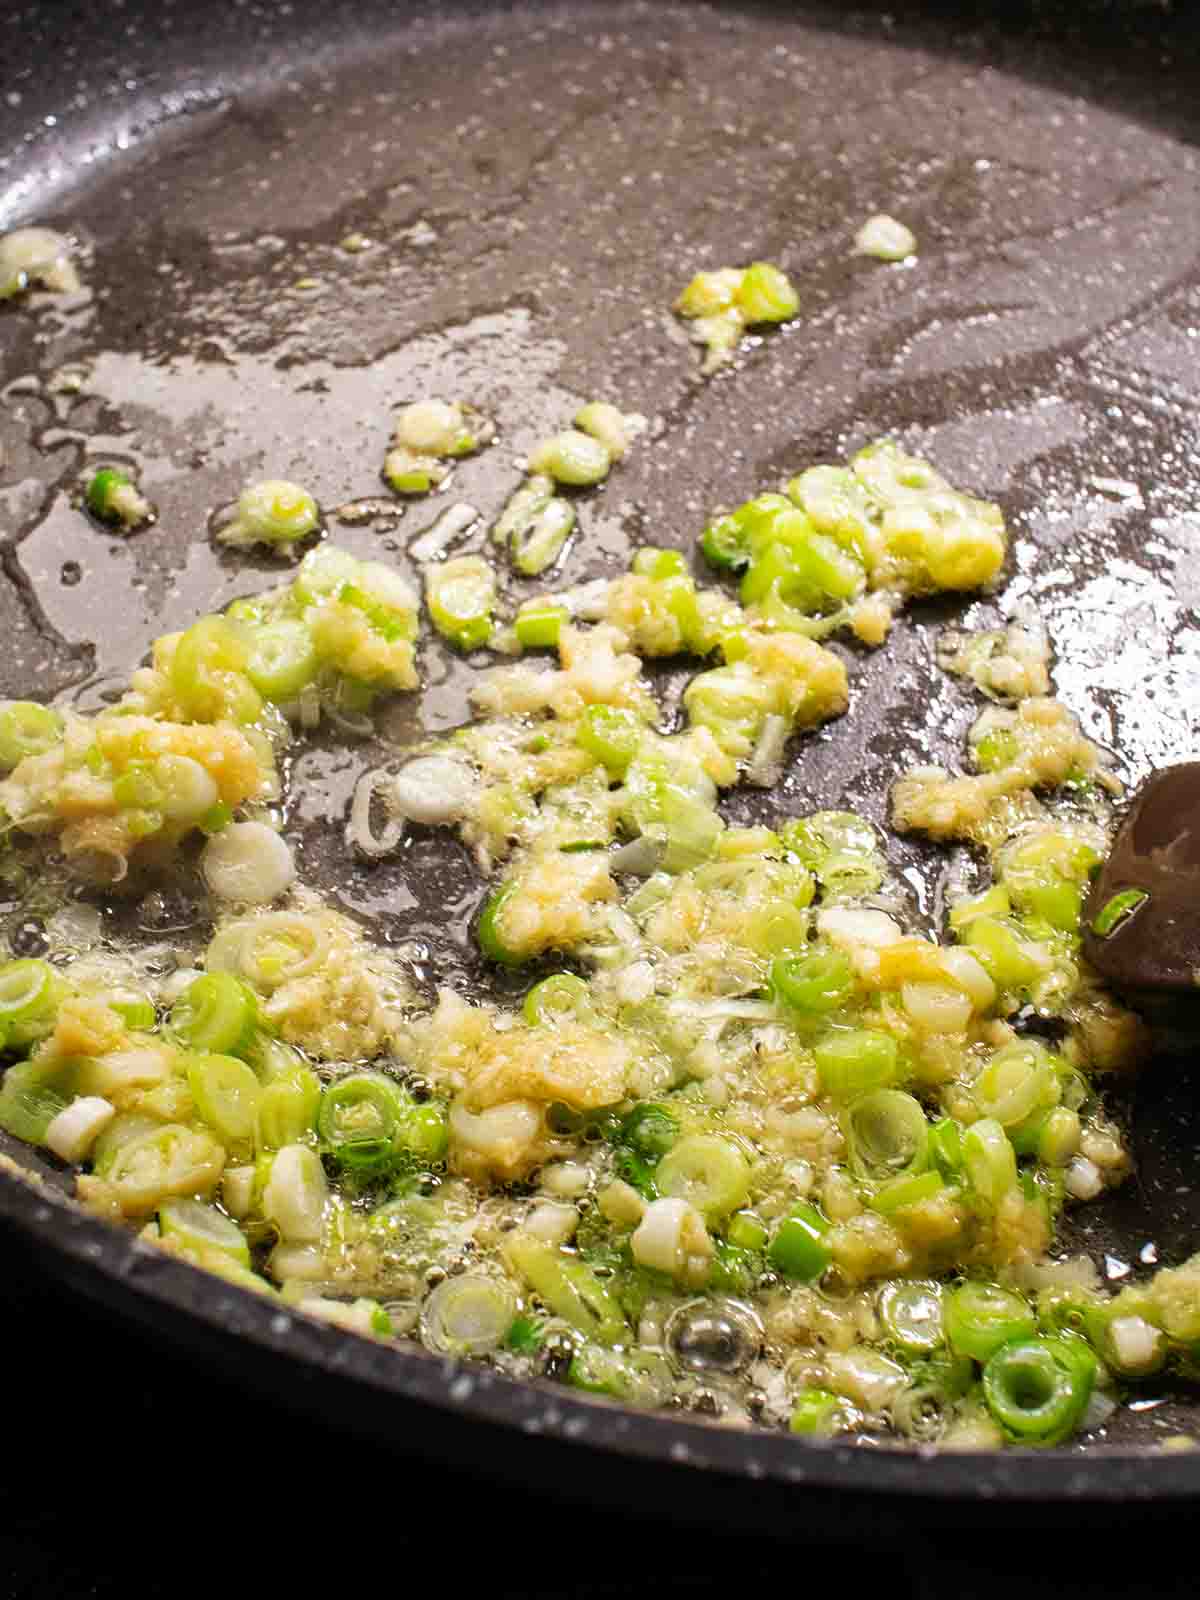 scallion, ginger and garlic sauteed in a pan with oil